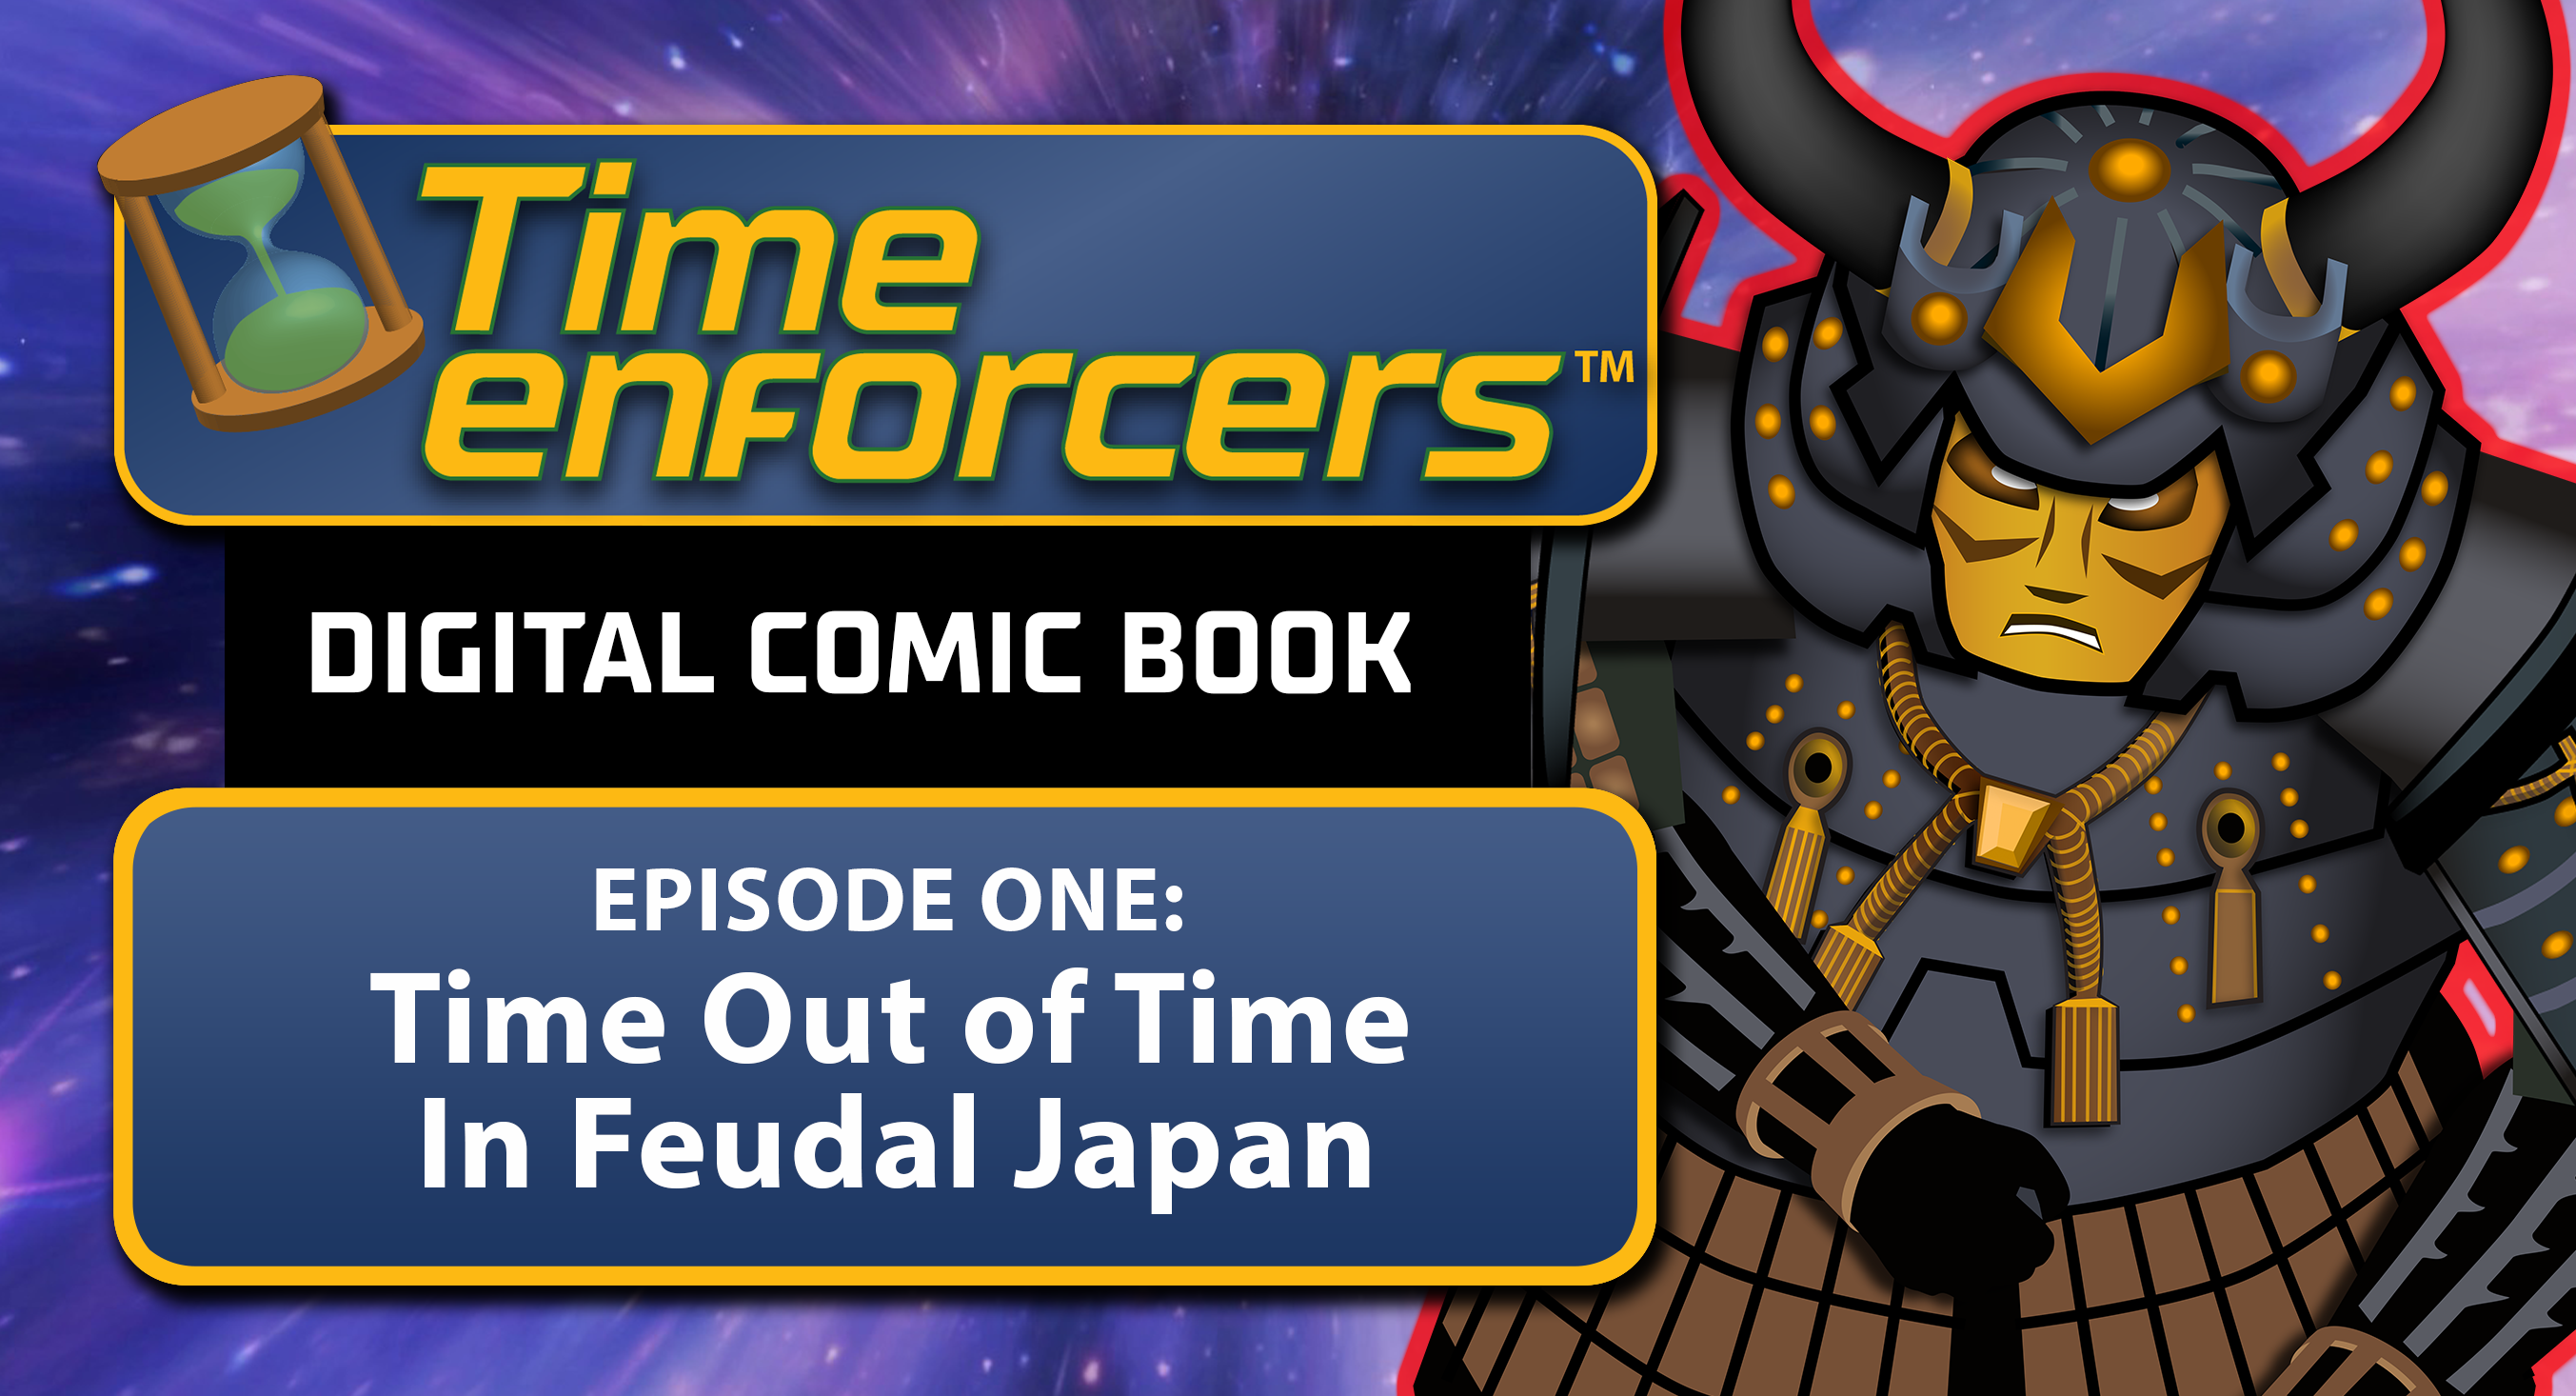 Time Enforcers Digital Comic Book Episode One: Time Out of Time in Feudal Japan